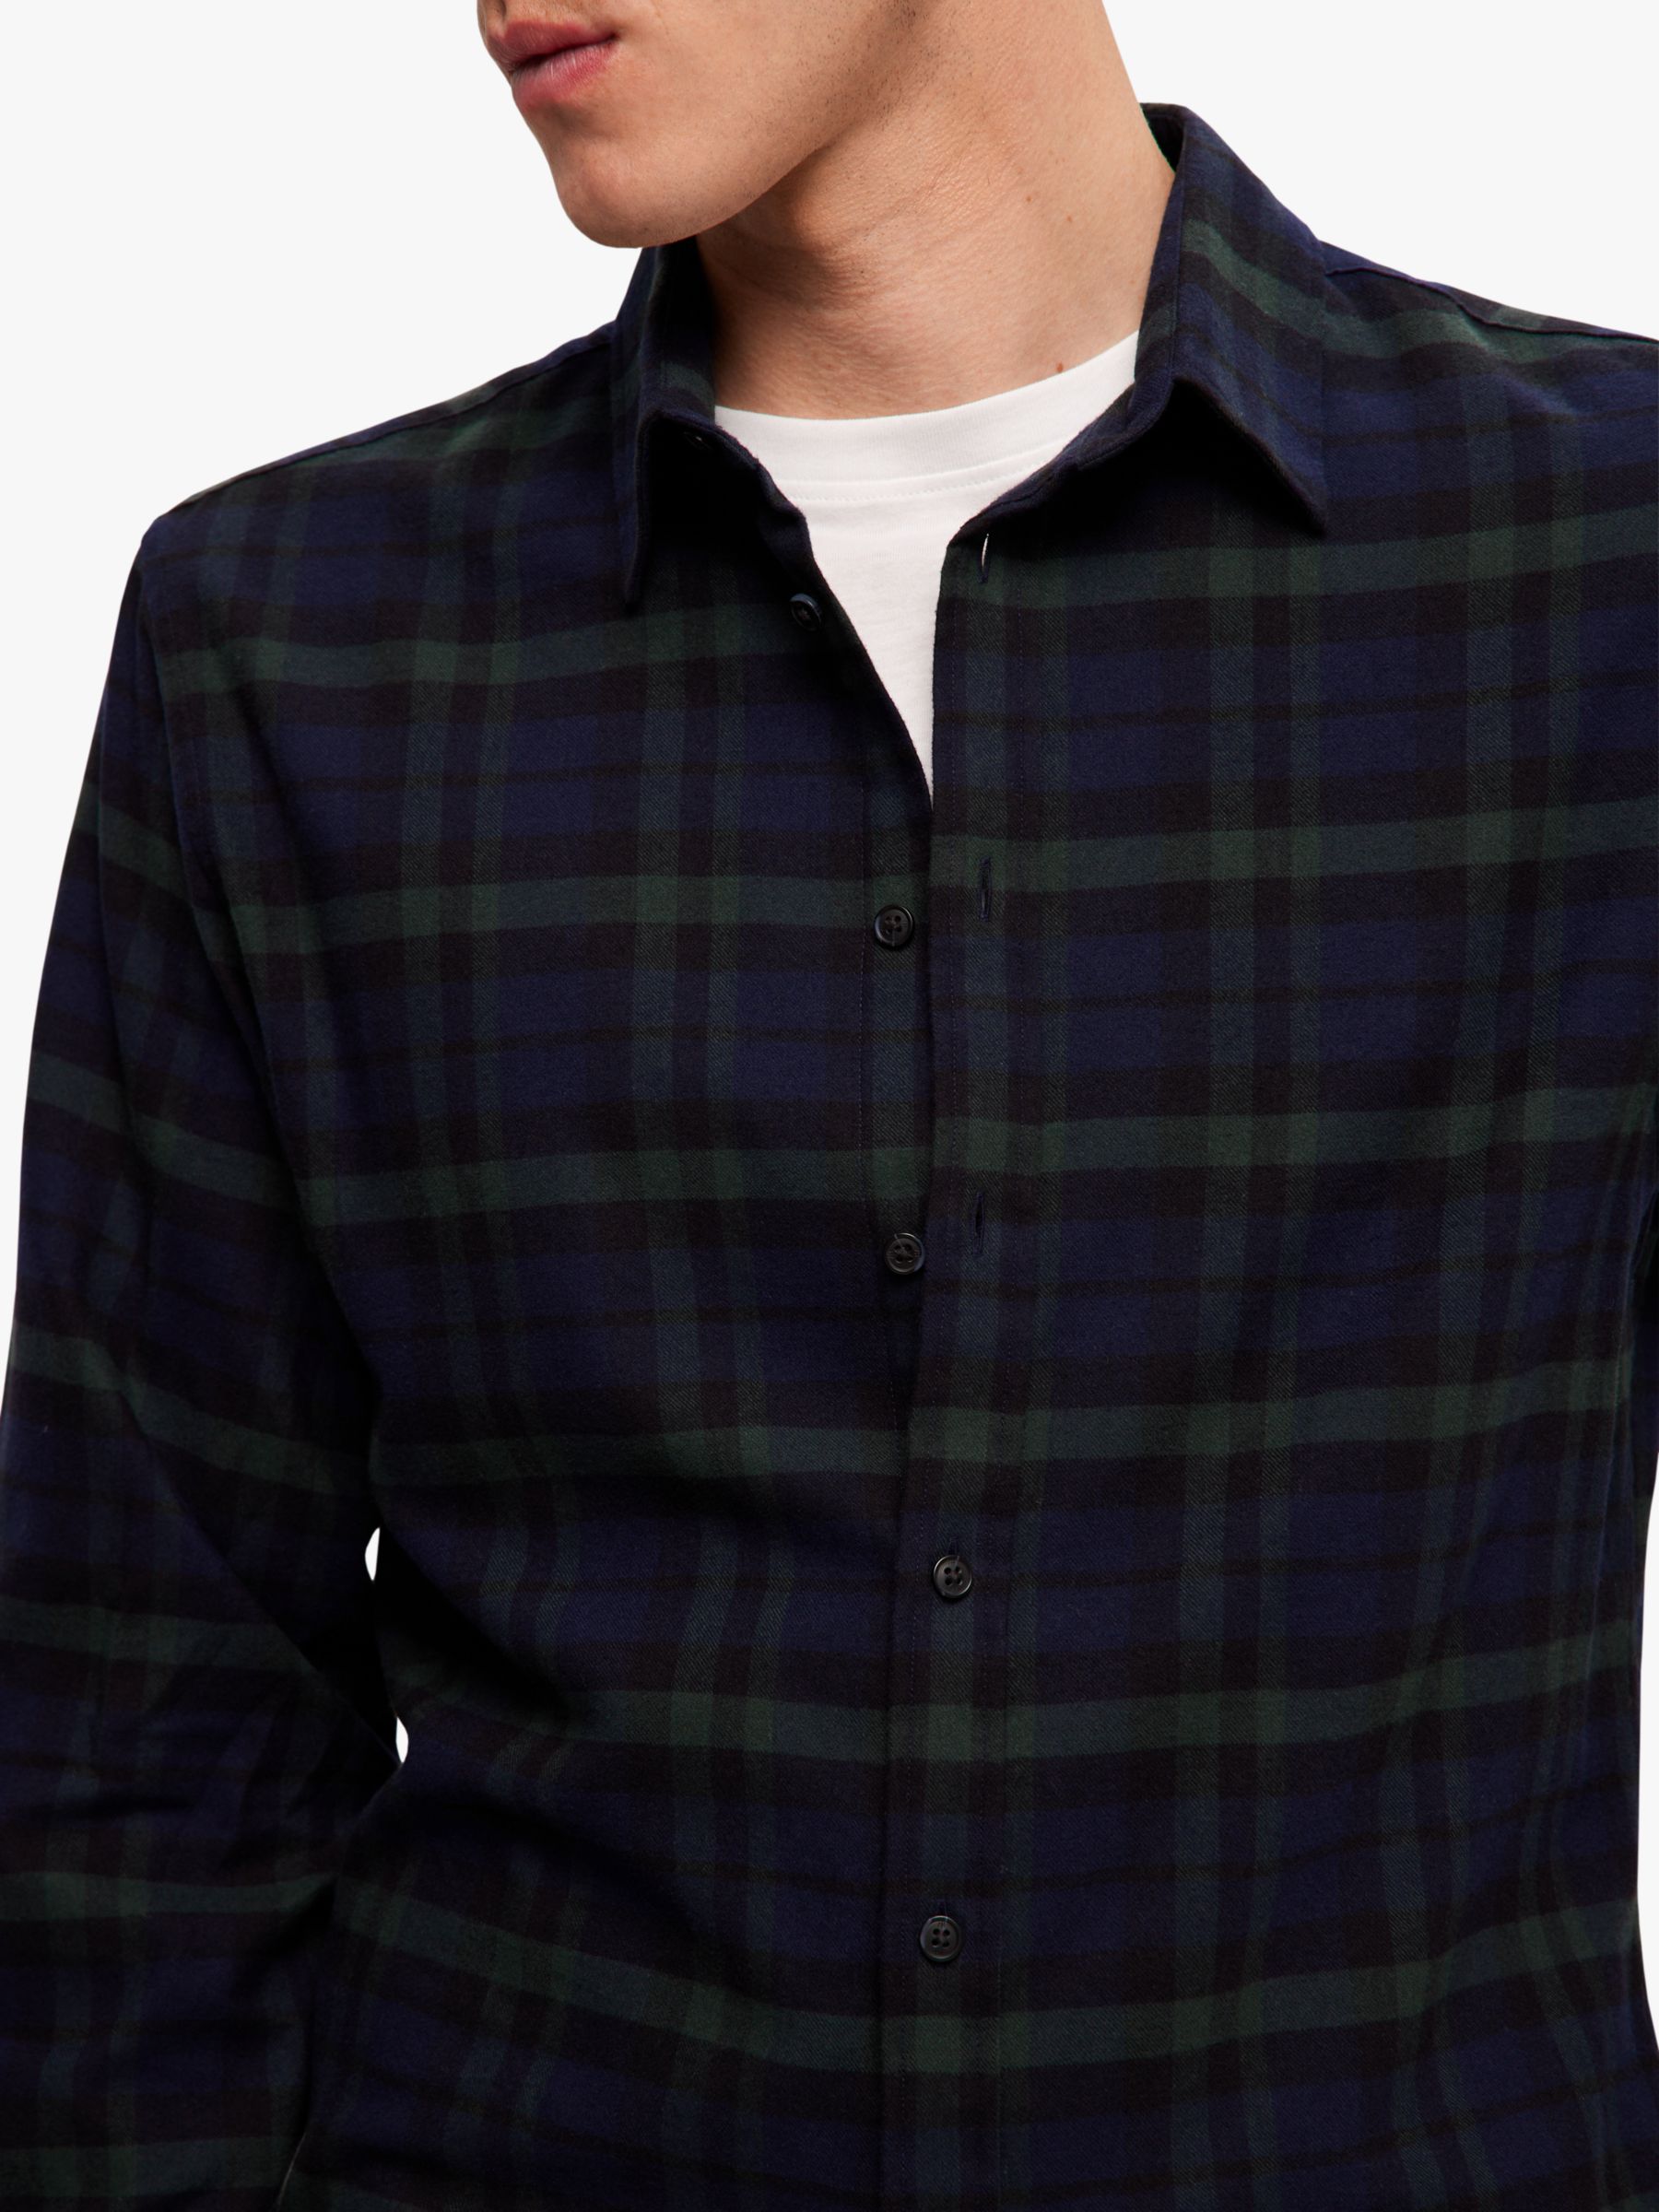 SELECTED HOMME Flannel Shirt, Blue/Multi, M